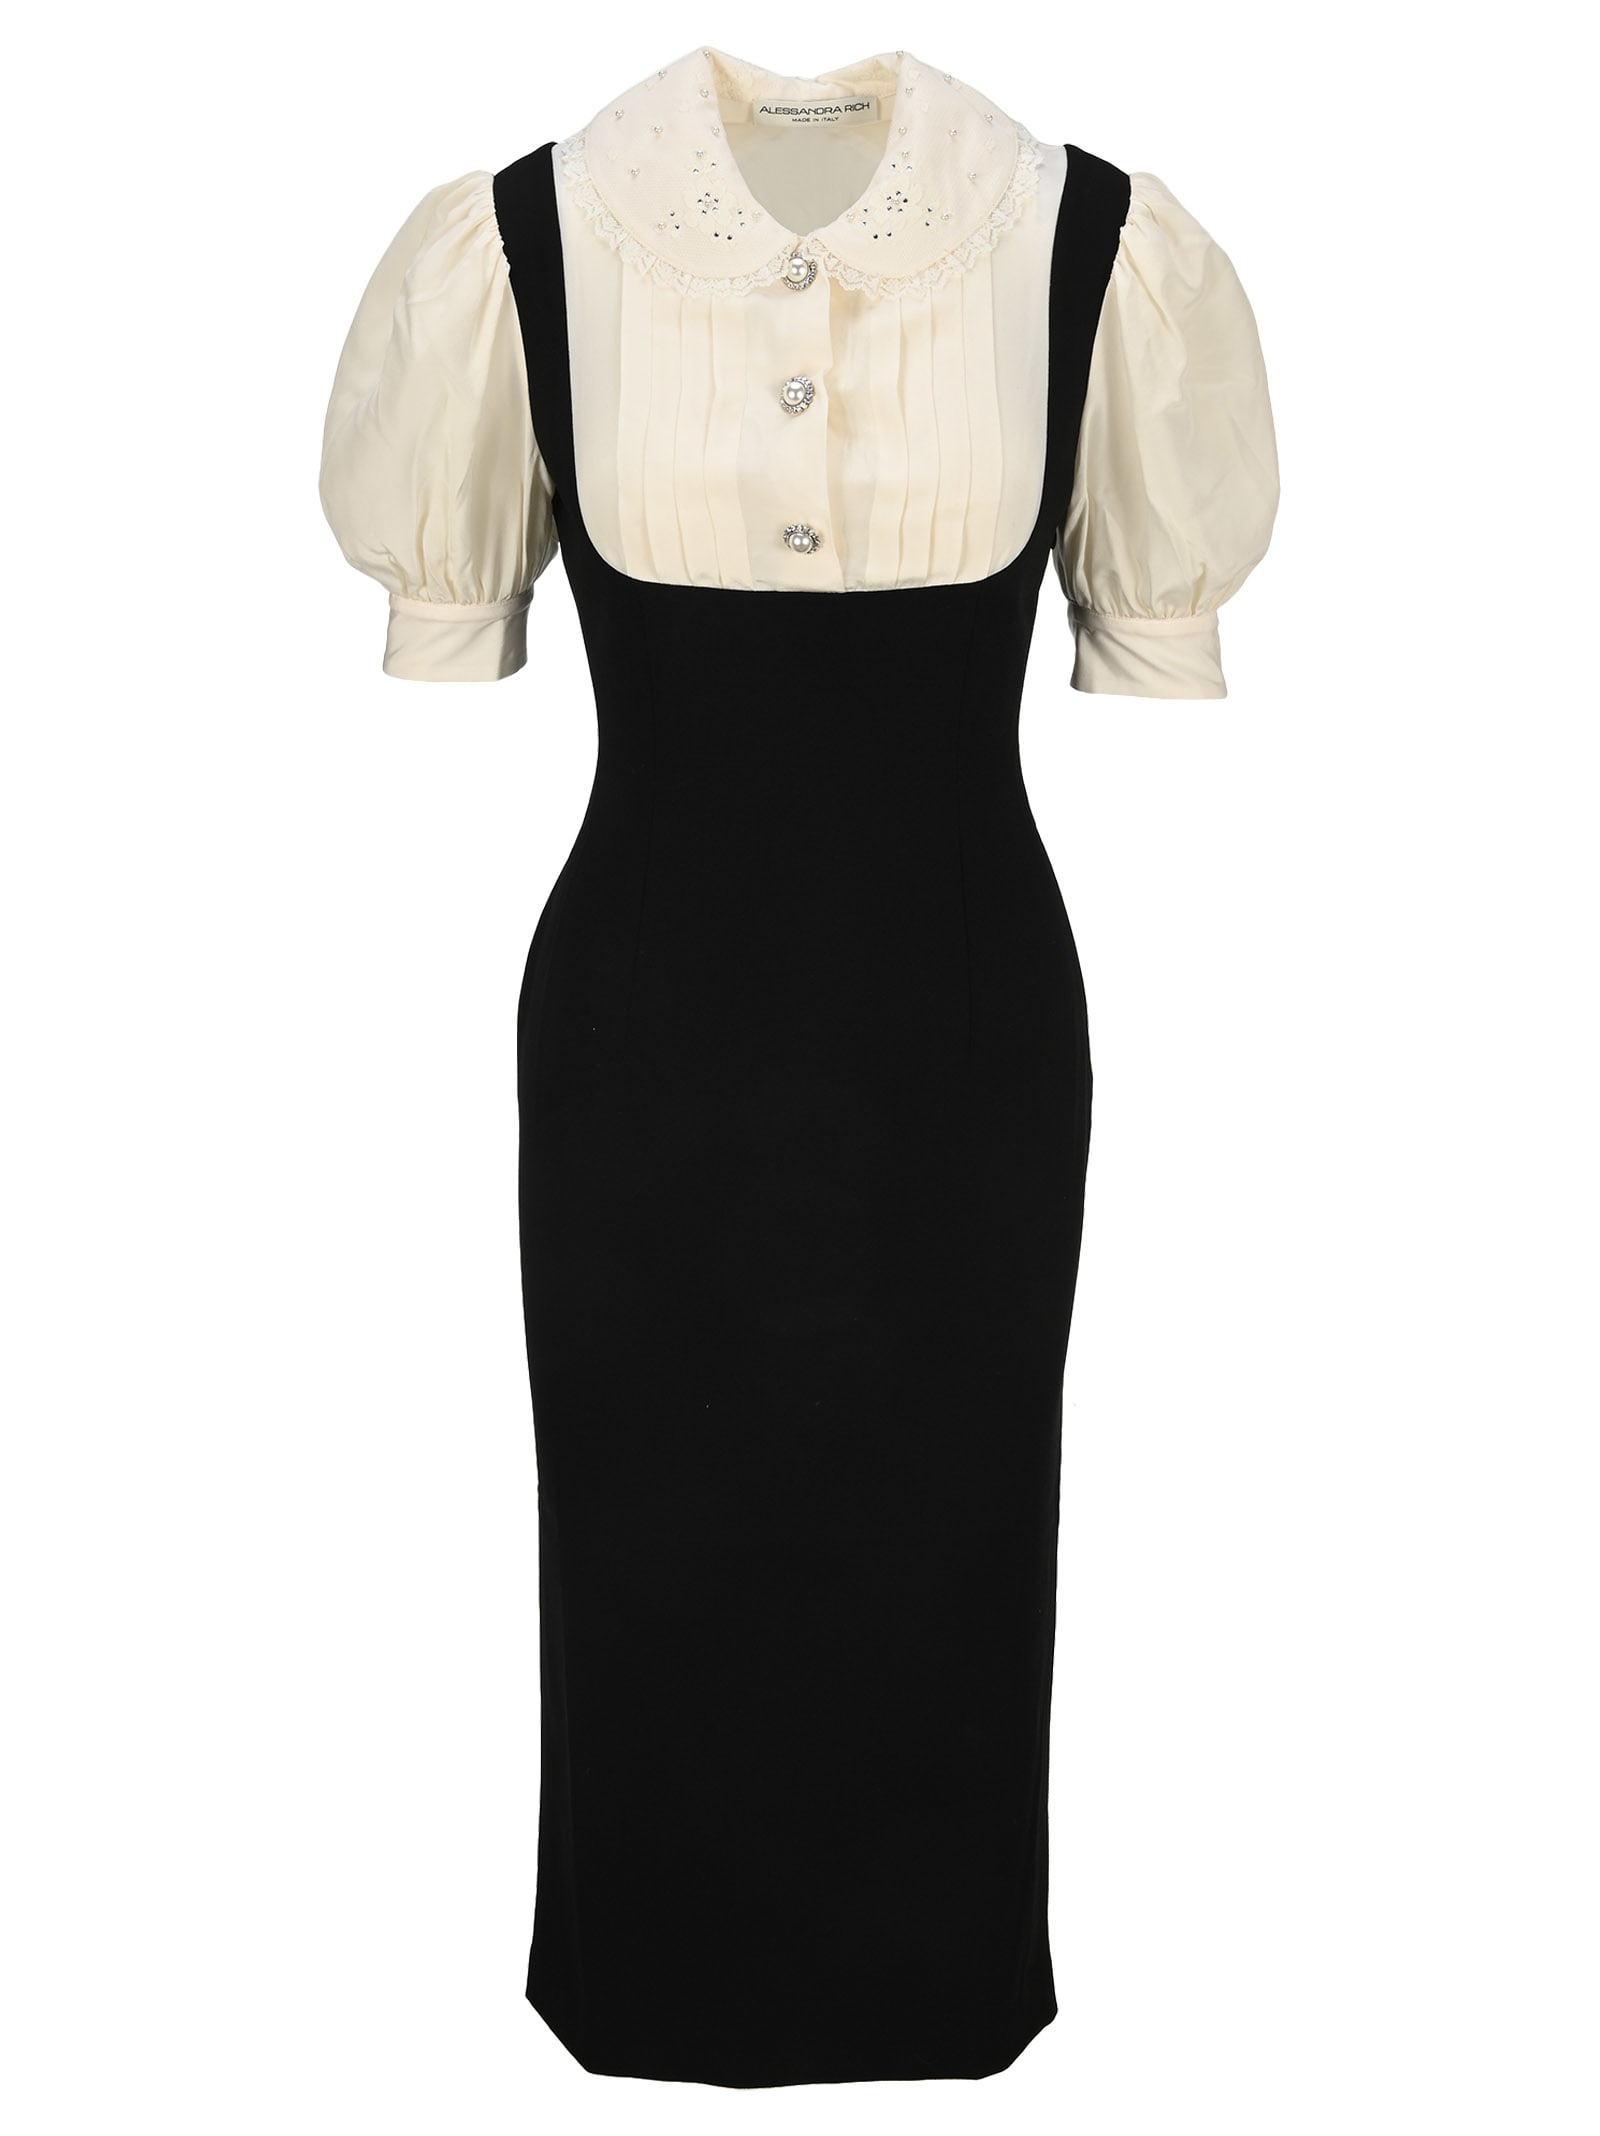 Alessandra Rich Black Stretch Wool Dress With White Silk Blouse